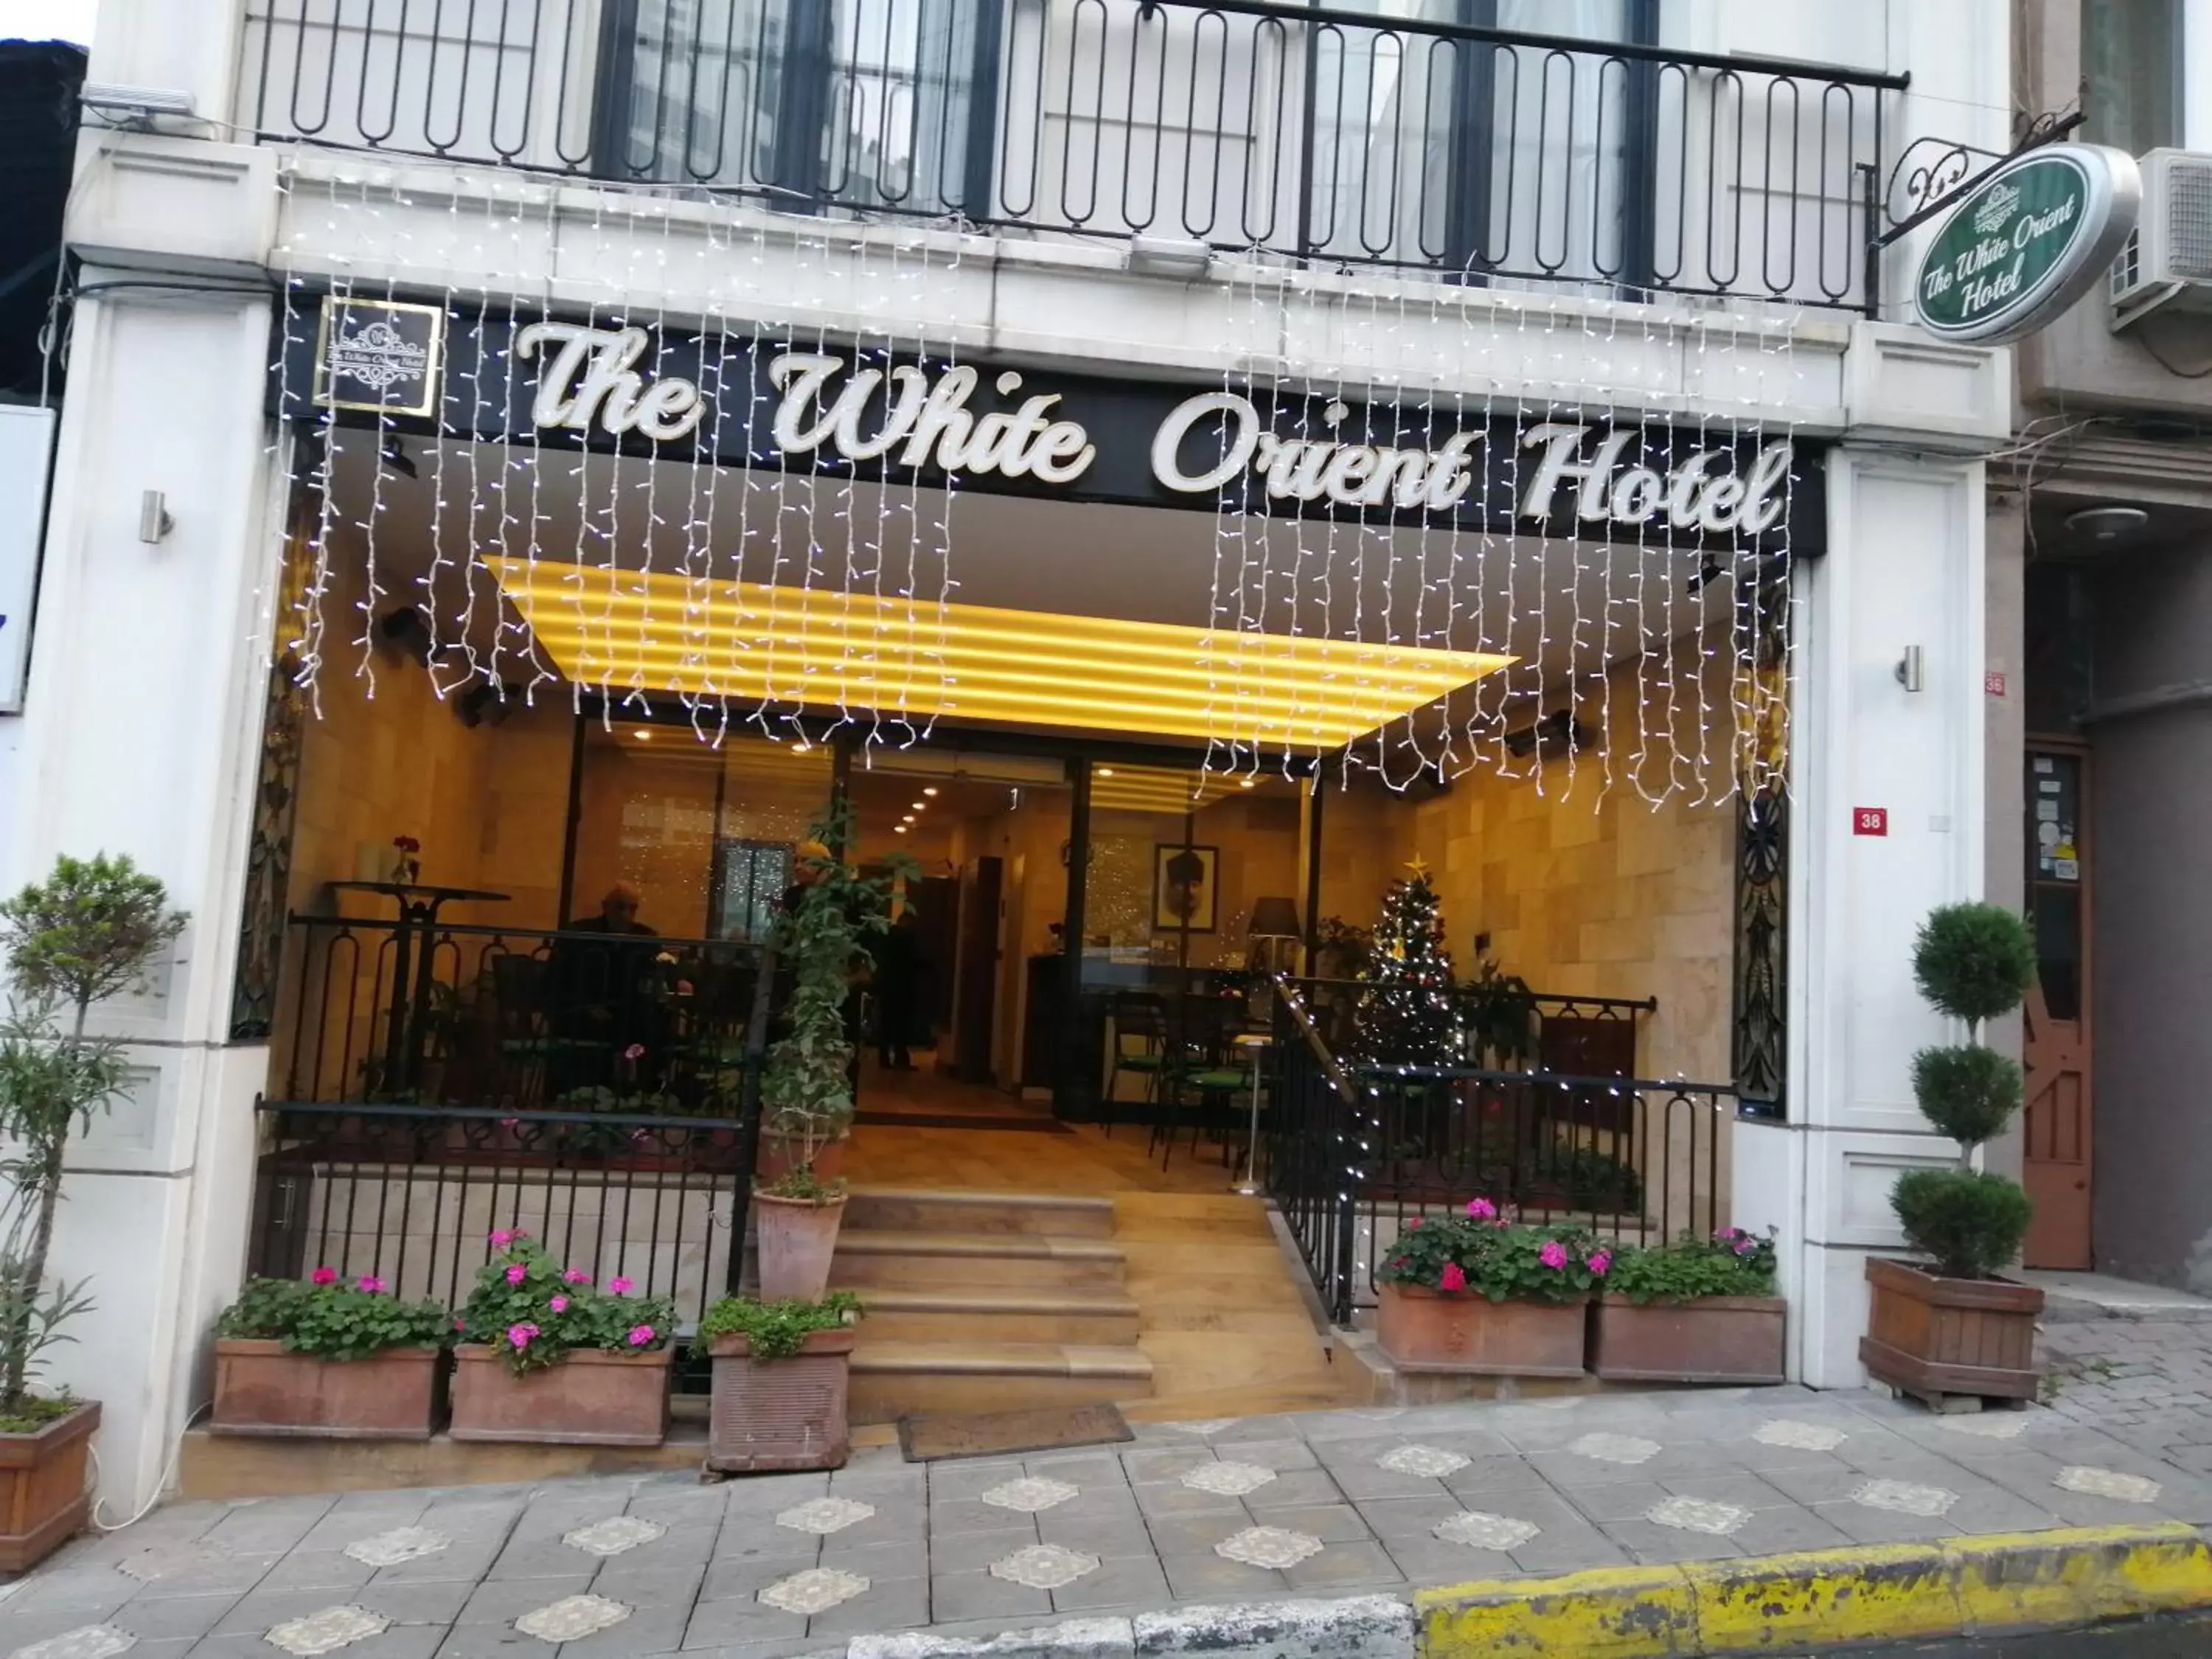 Facade/entrance in The White Orient Hotel